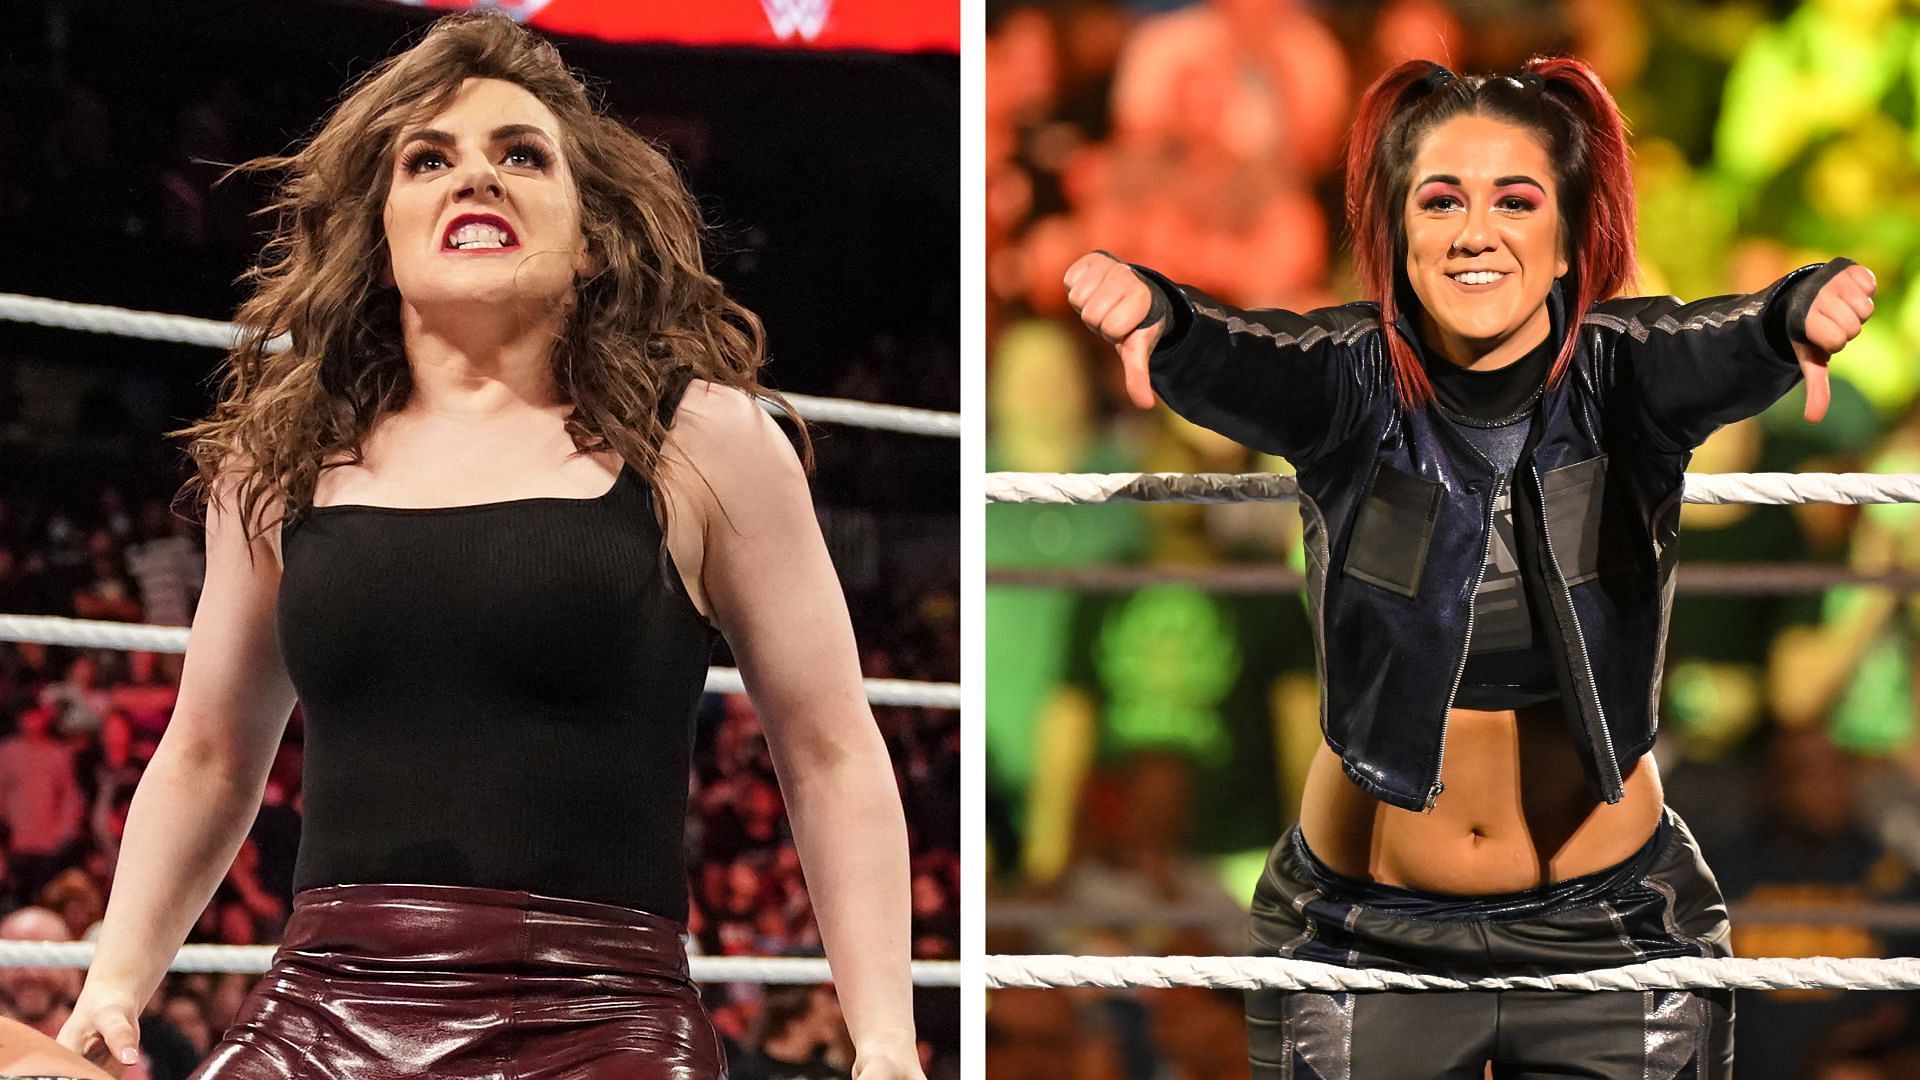 Nikki Cross recently returned to WWE RAW without her superhero gimmick